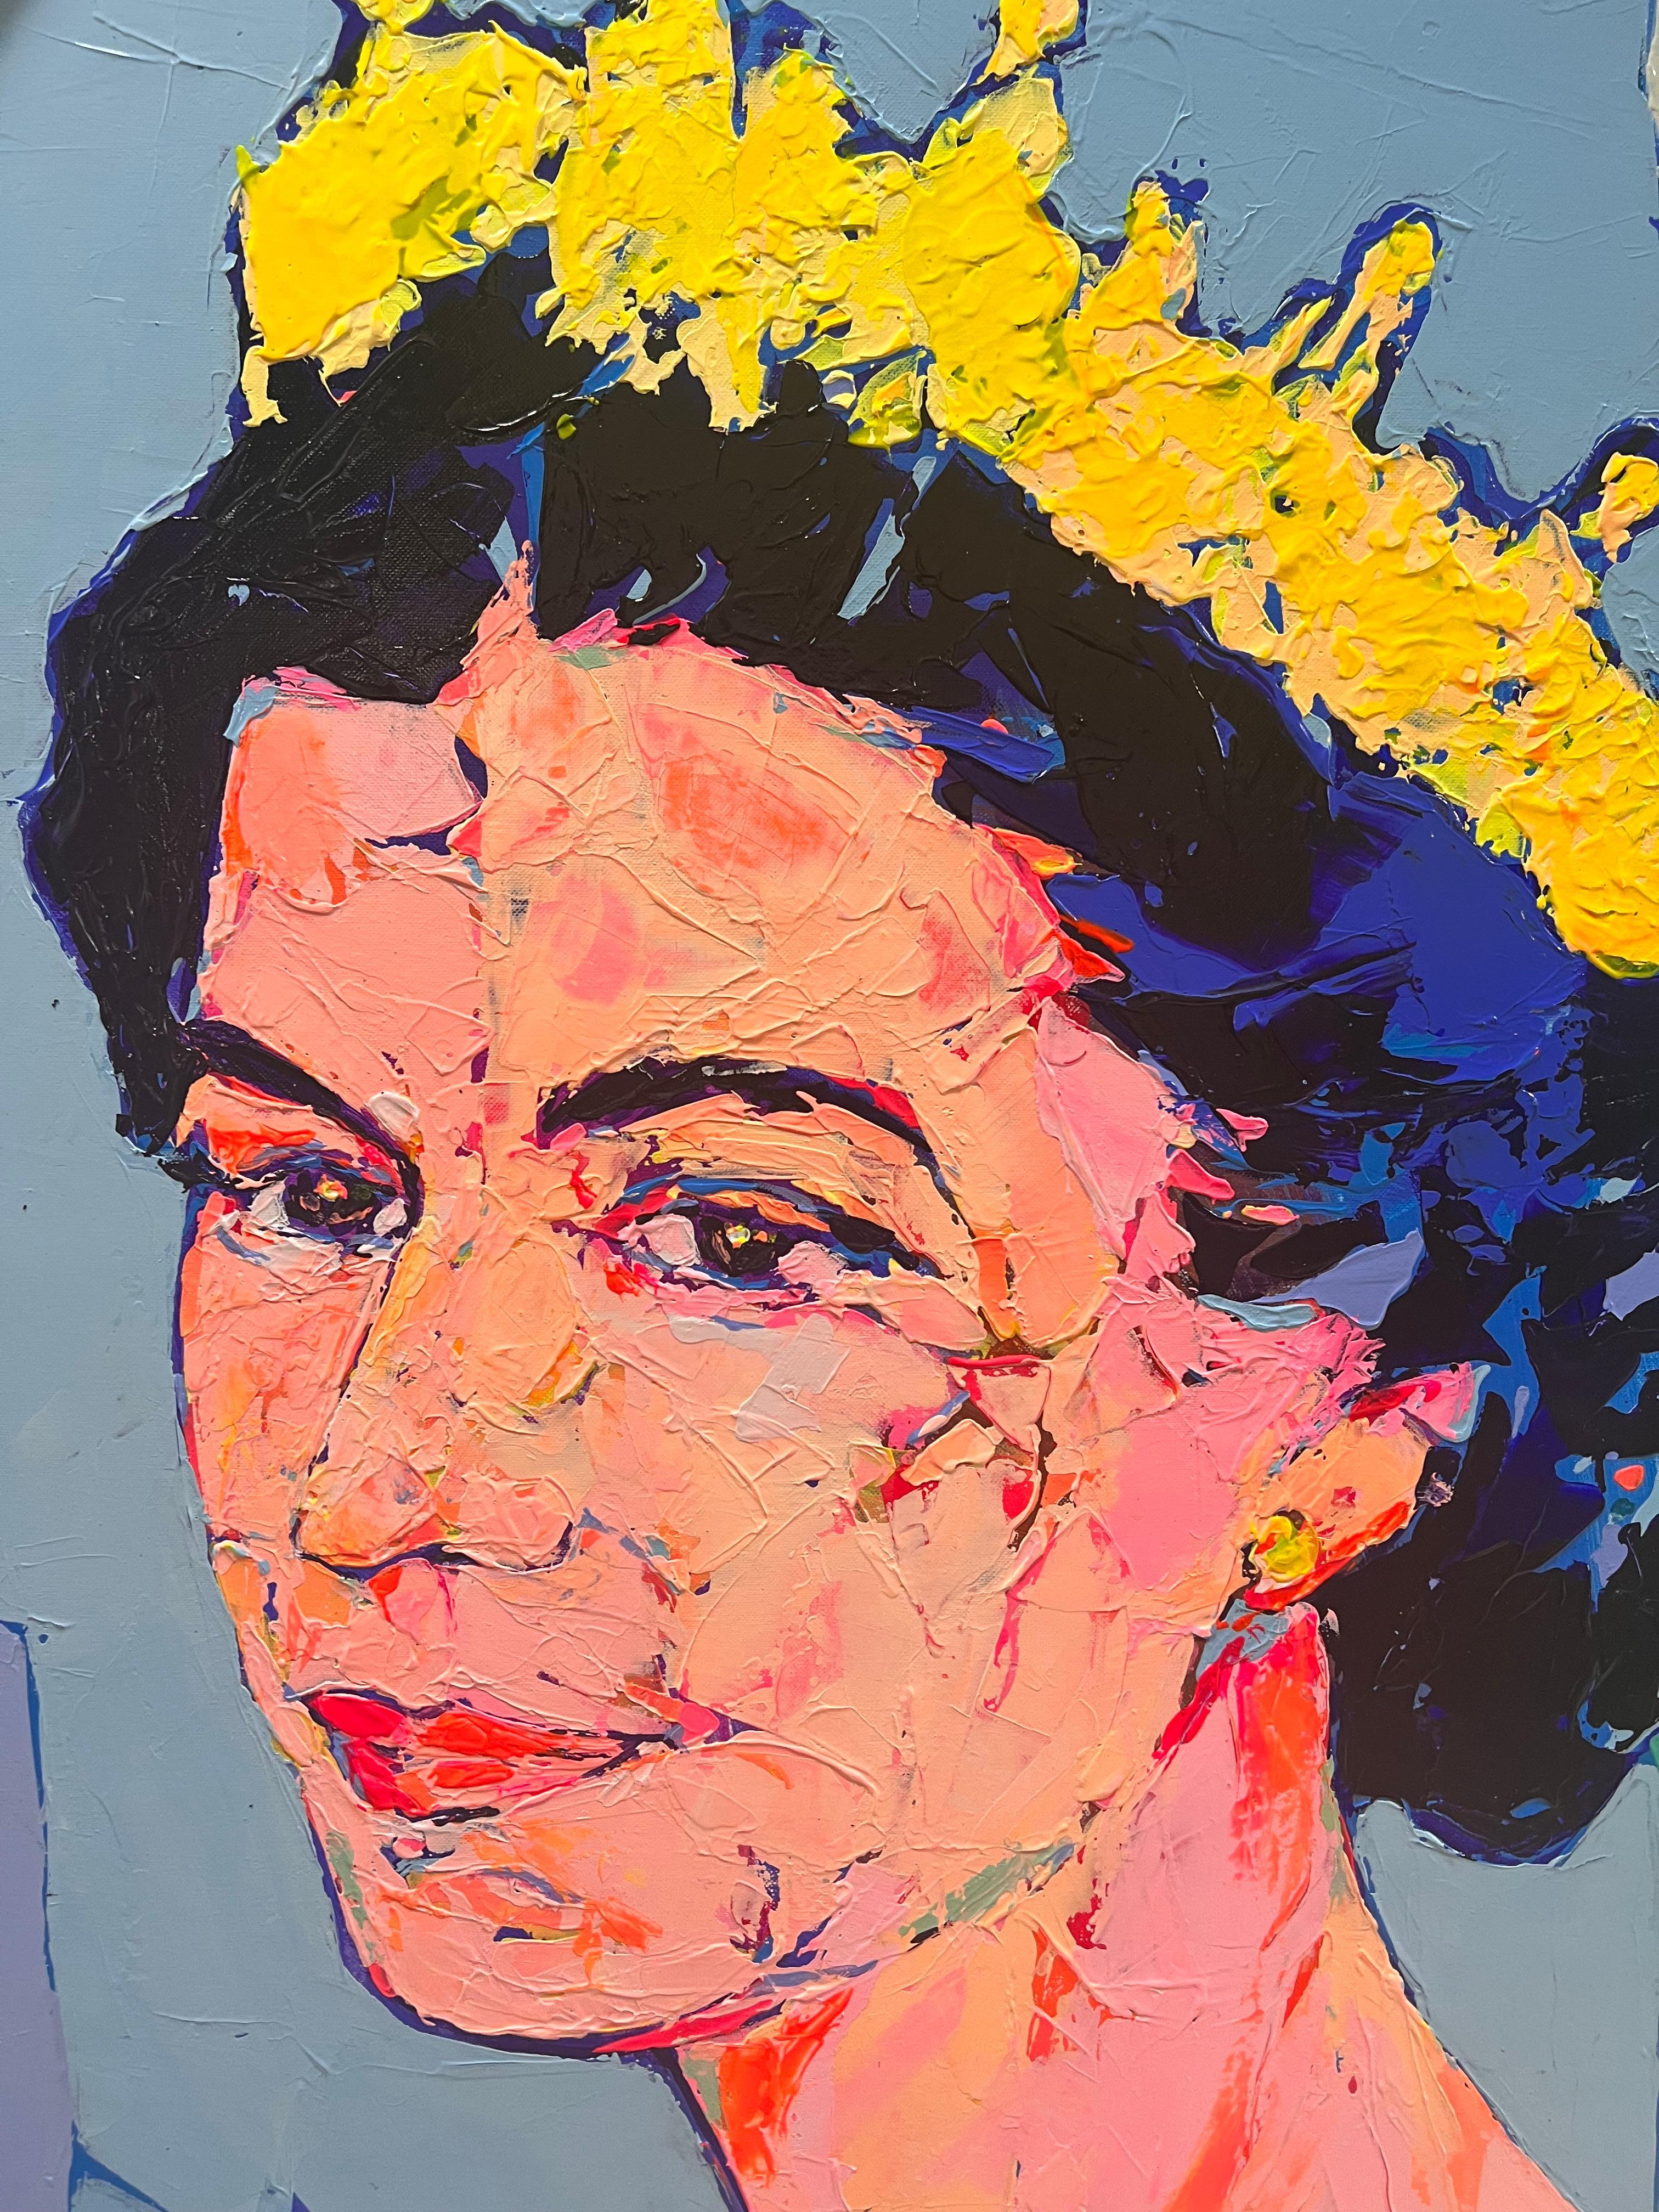 Queen Elizabeth - Painting by Federico Lopez